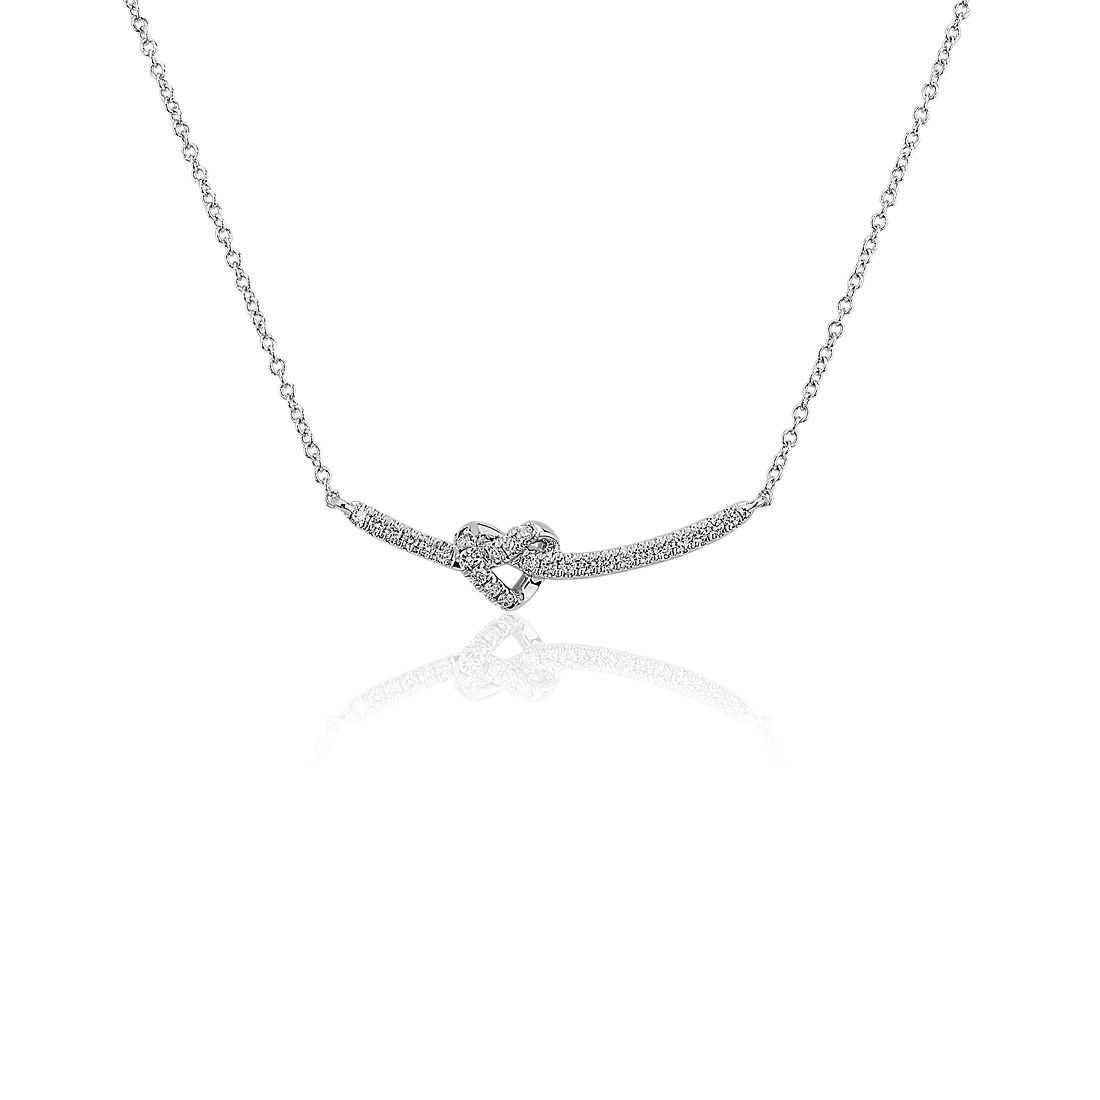 Heart Knot Curved Bar Necklace in 14k White Gold (0.14 ct. tw.)